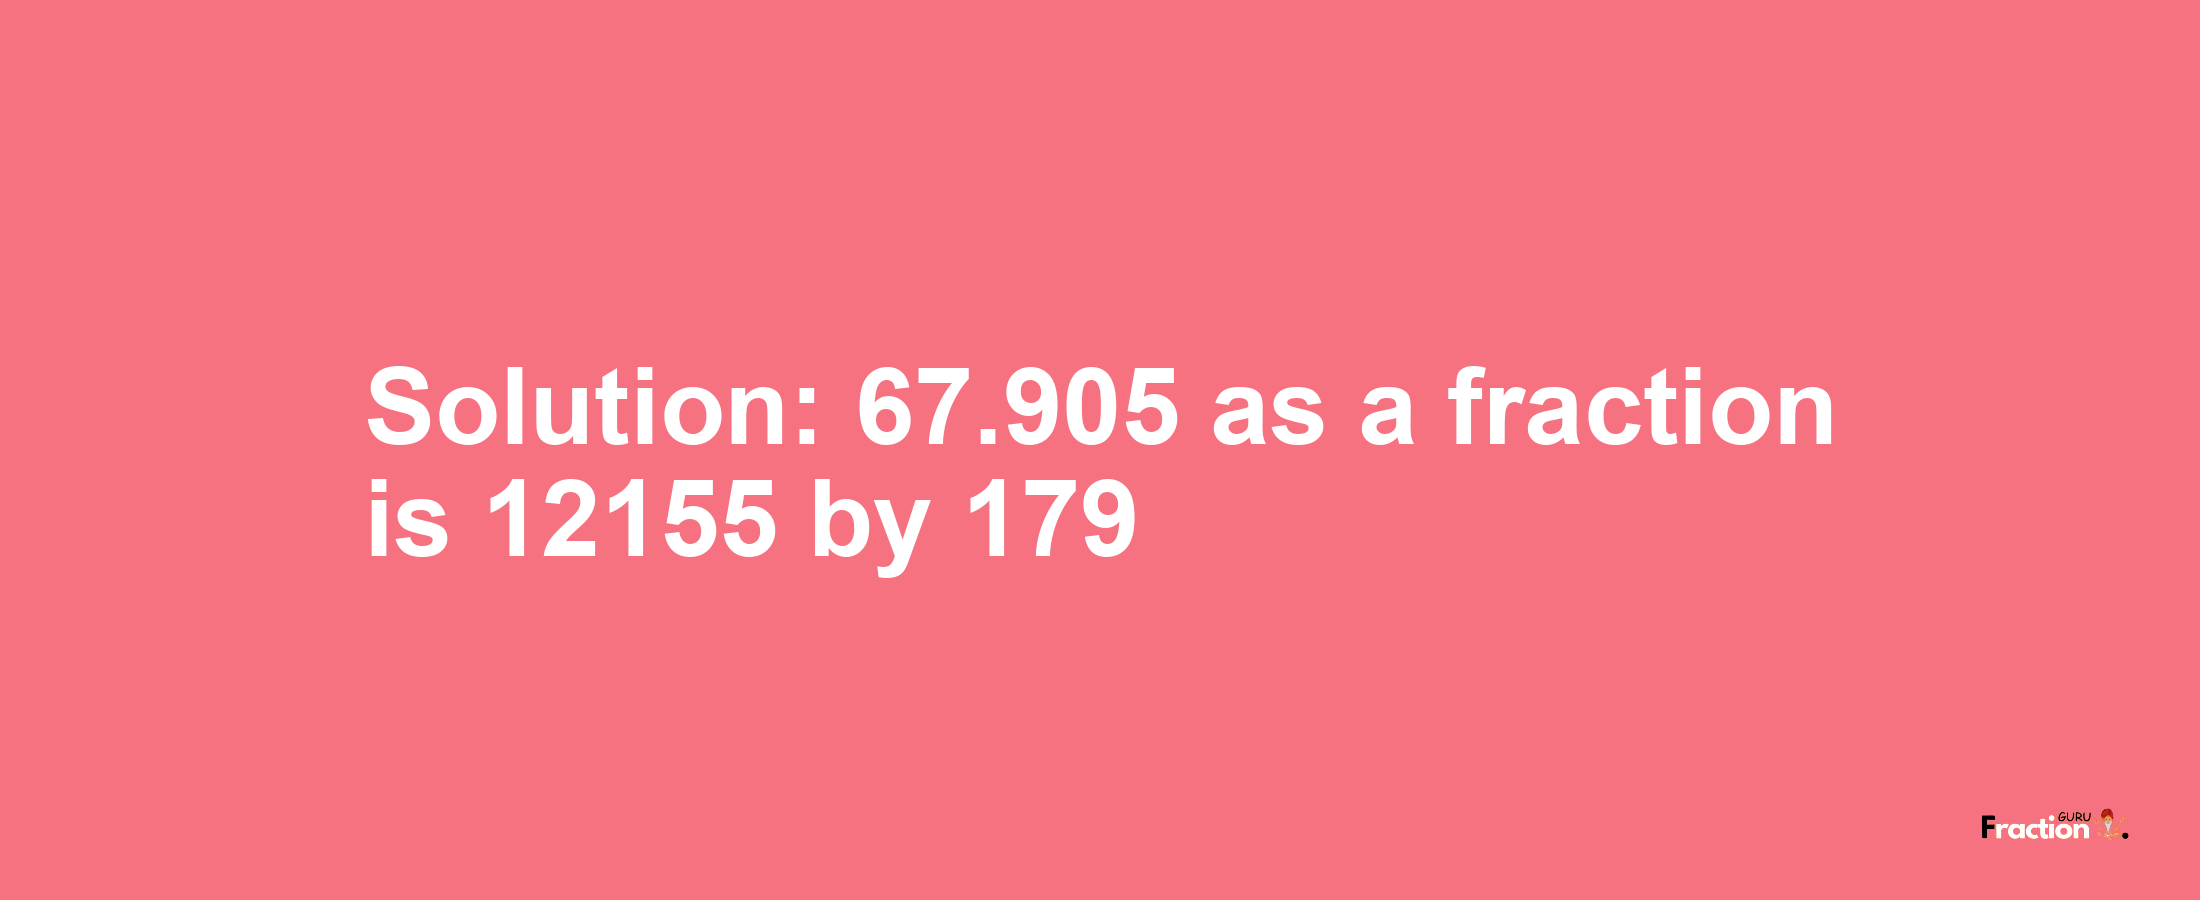 Solution:67.905 as a fraction is 12155/179